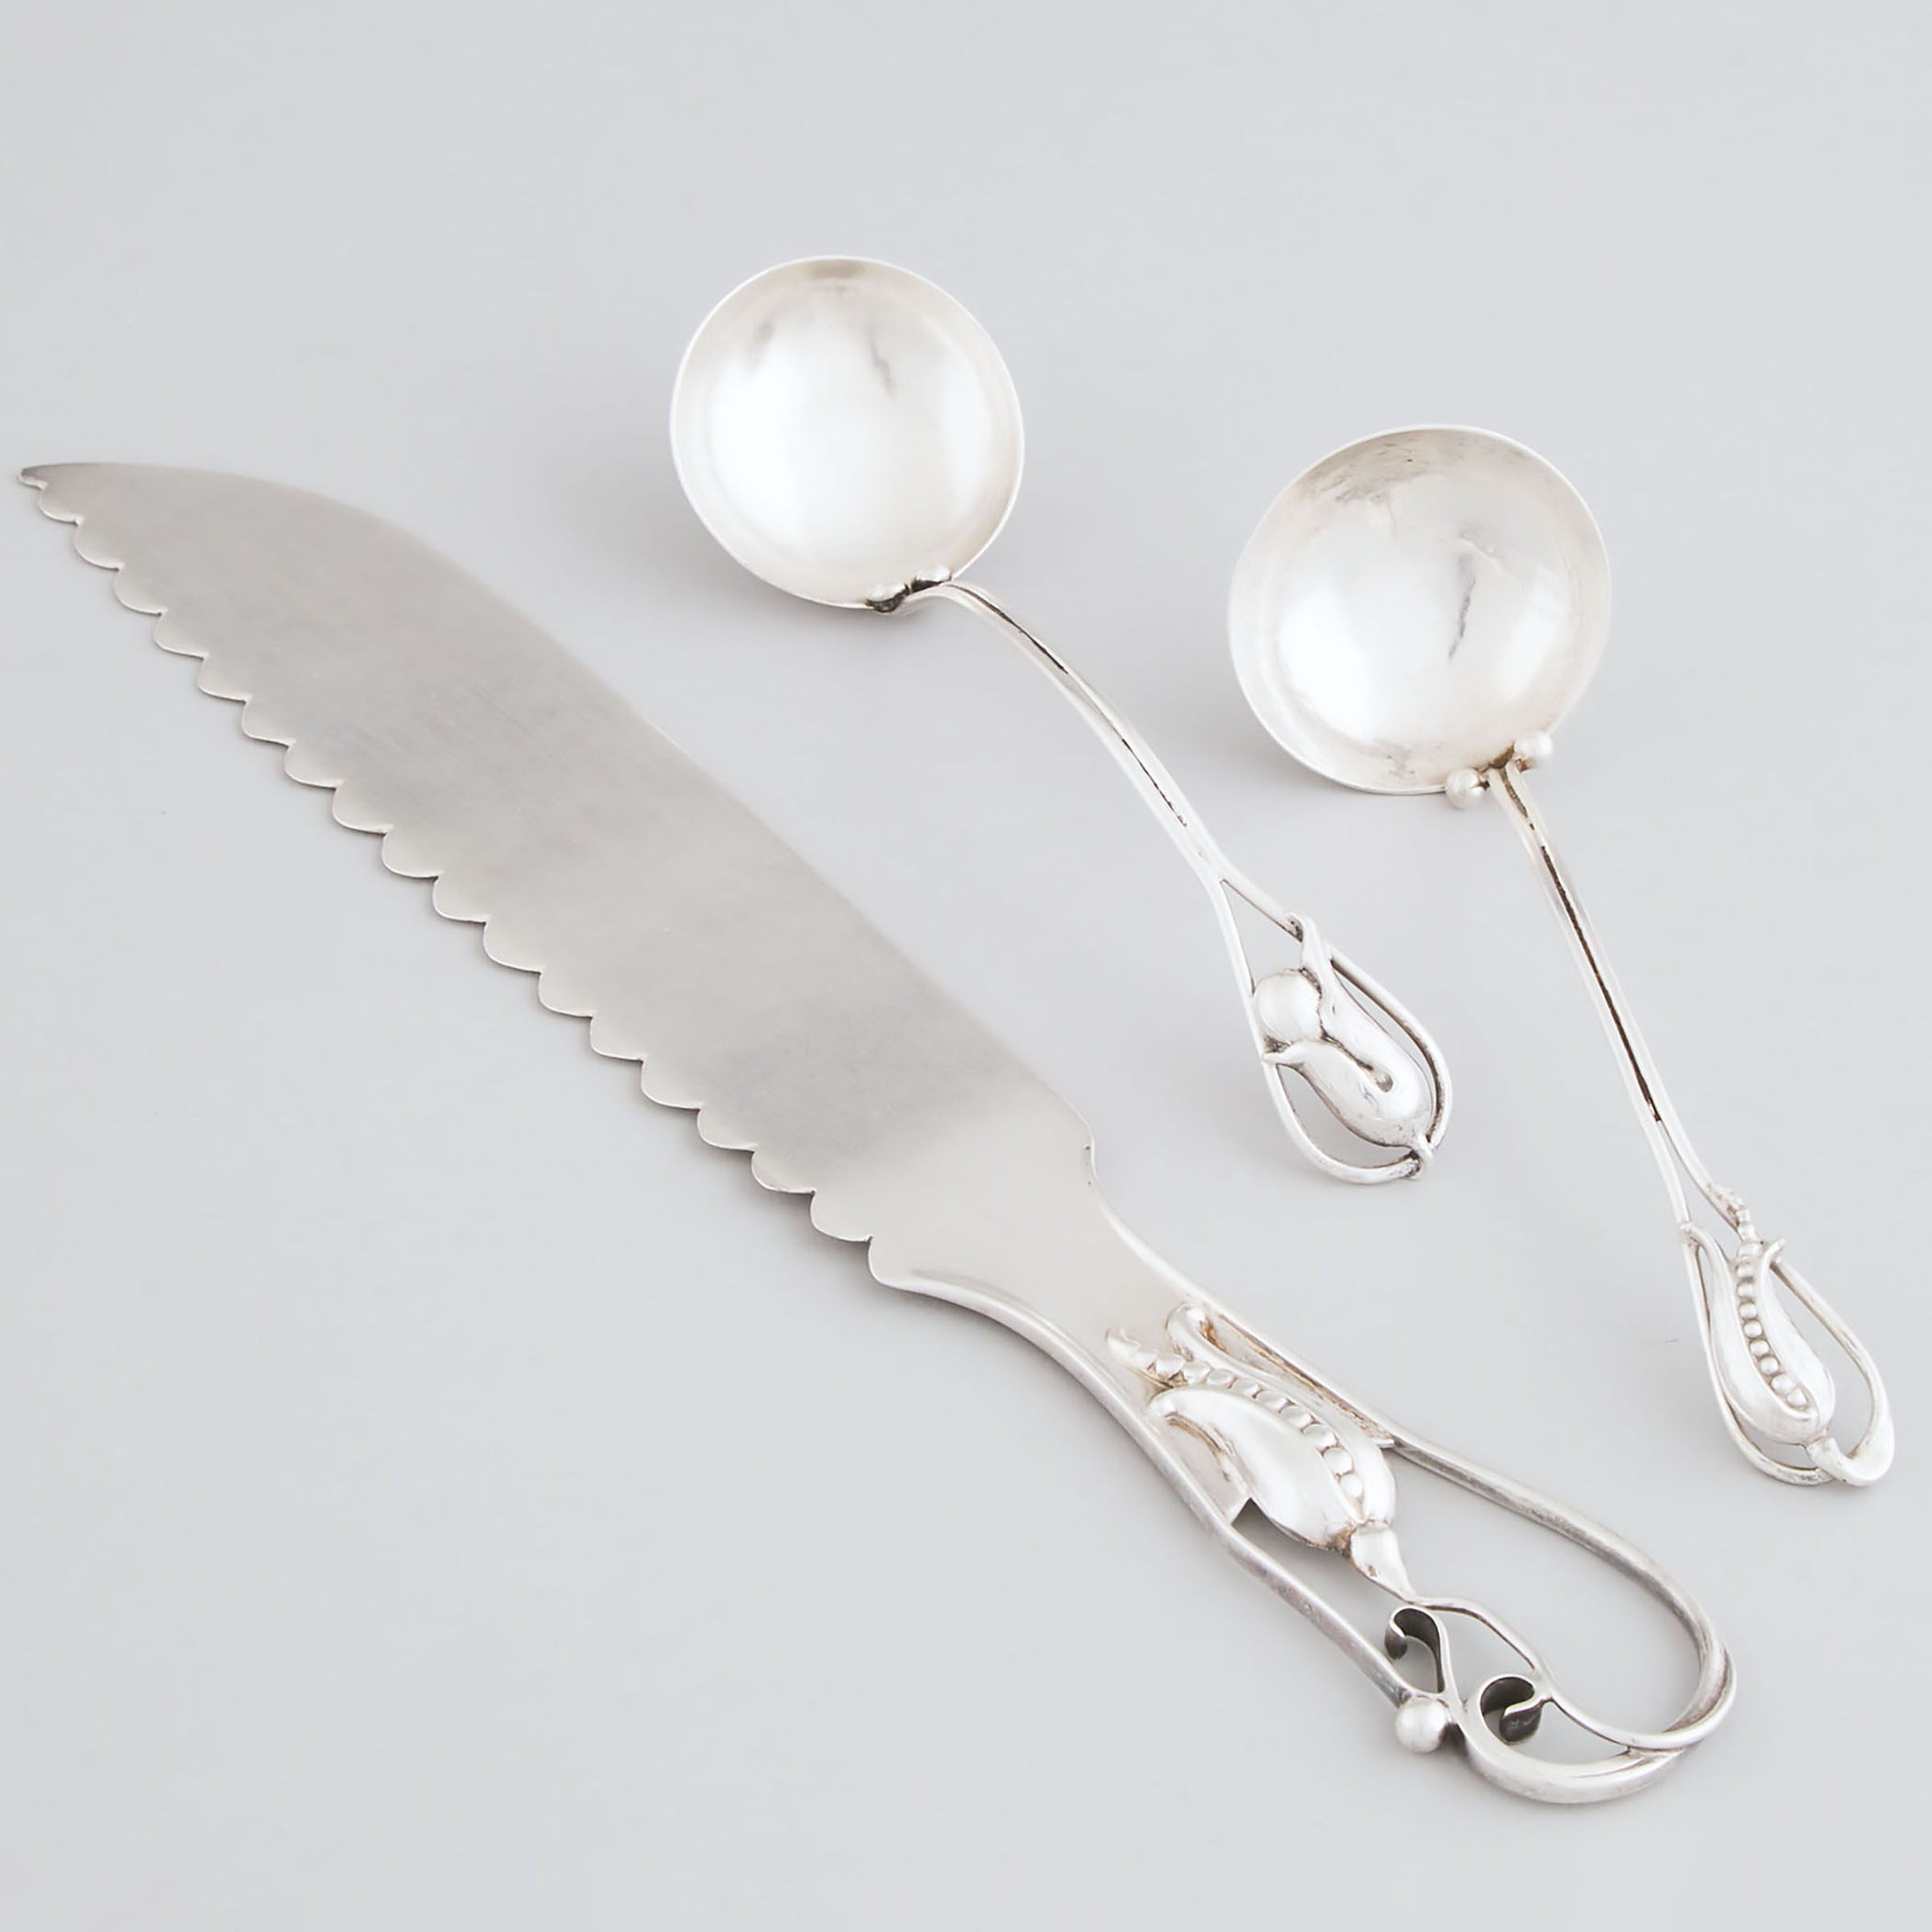 Canadian Silver Cake Knife and Two Sauce Ladles, Poul Petersen, Montreal, Que., mid-20th century